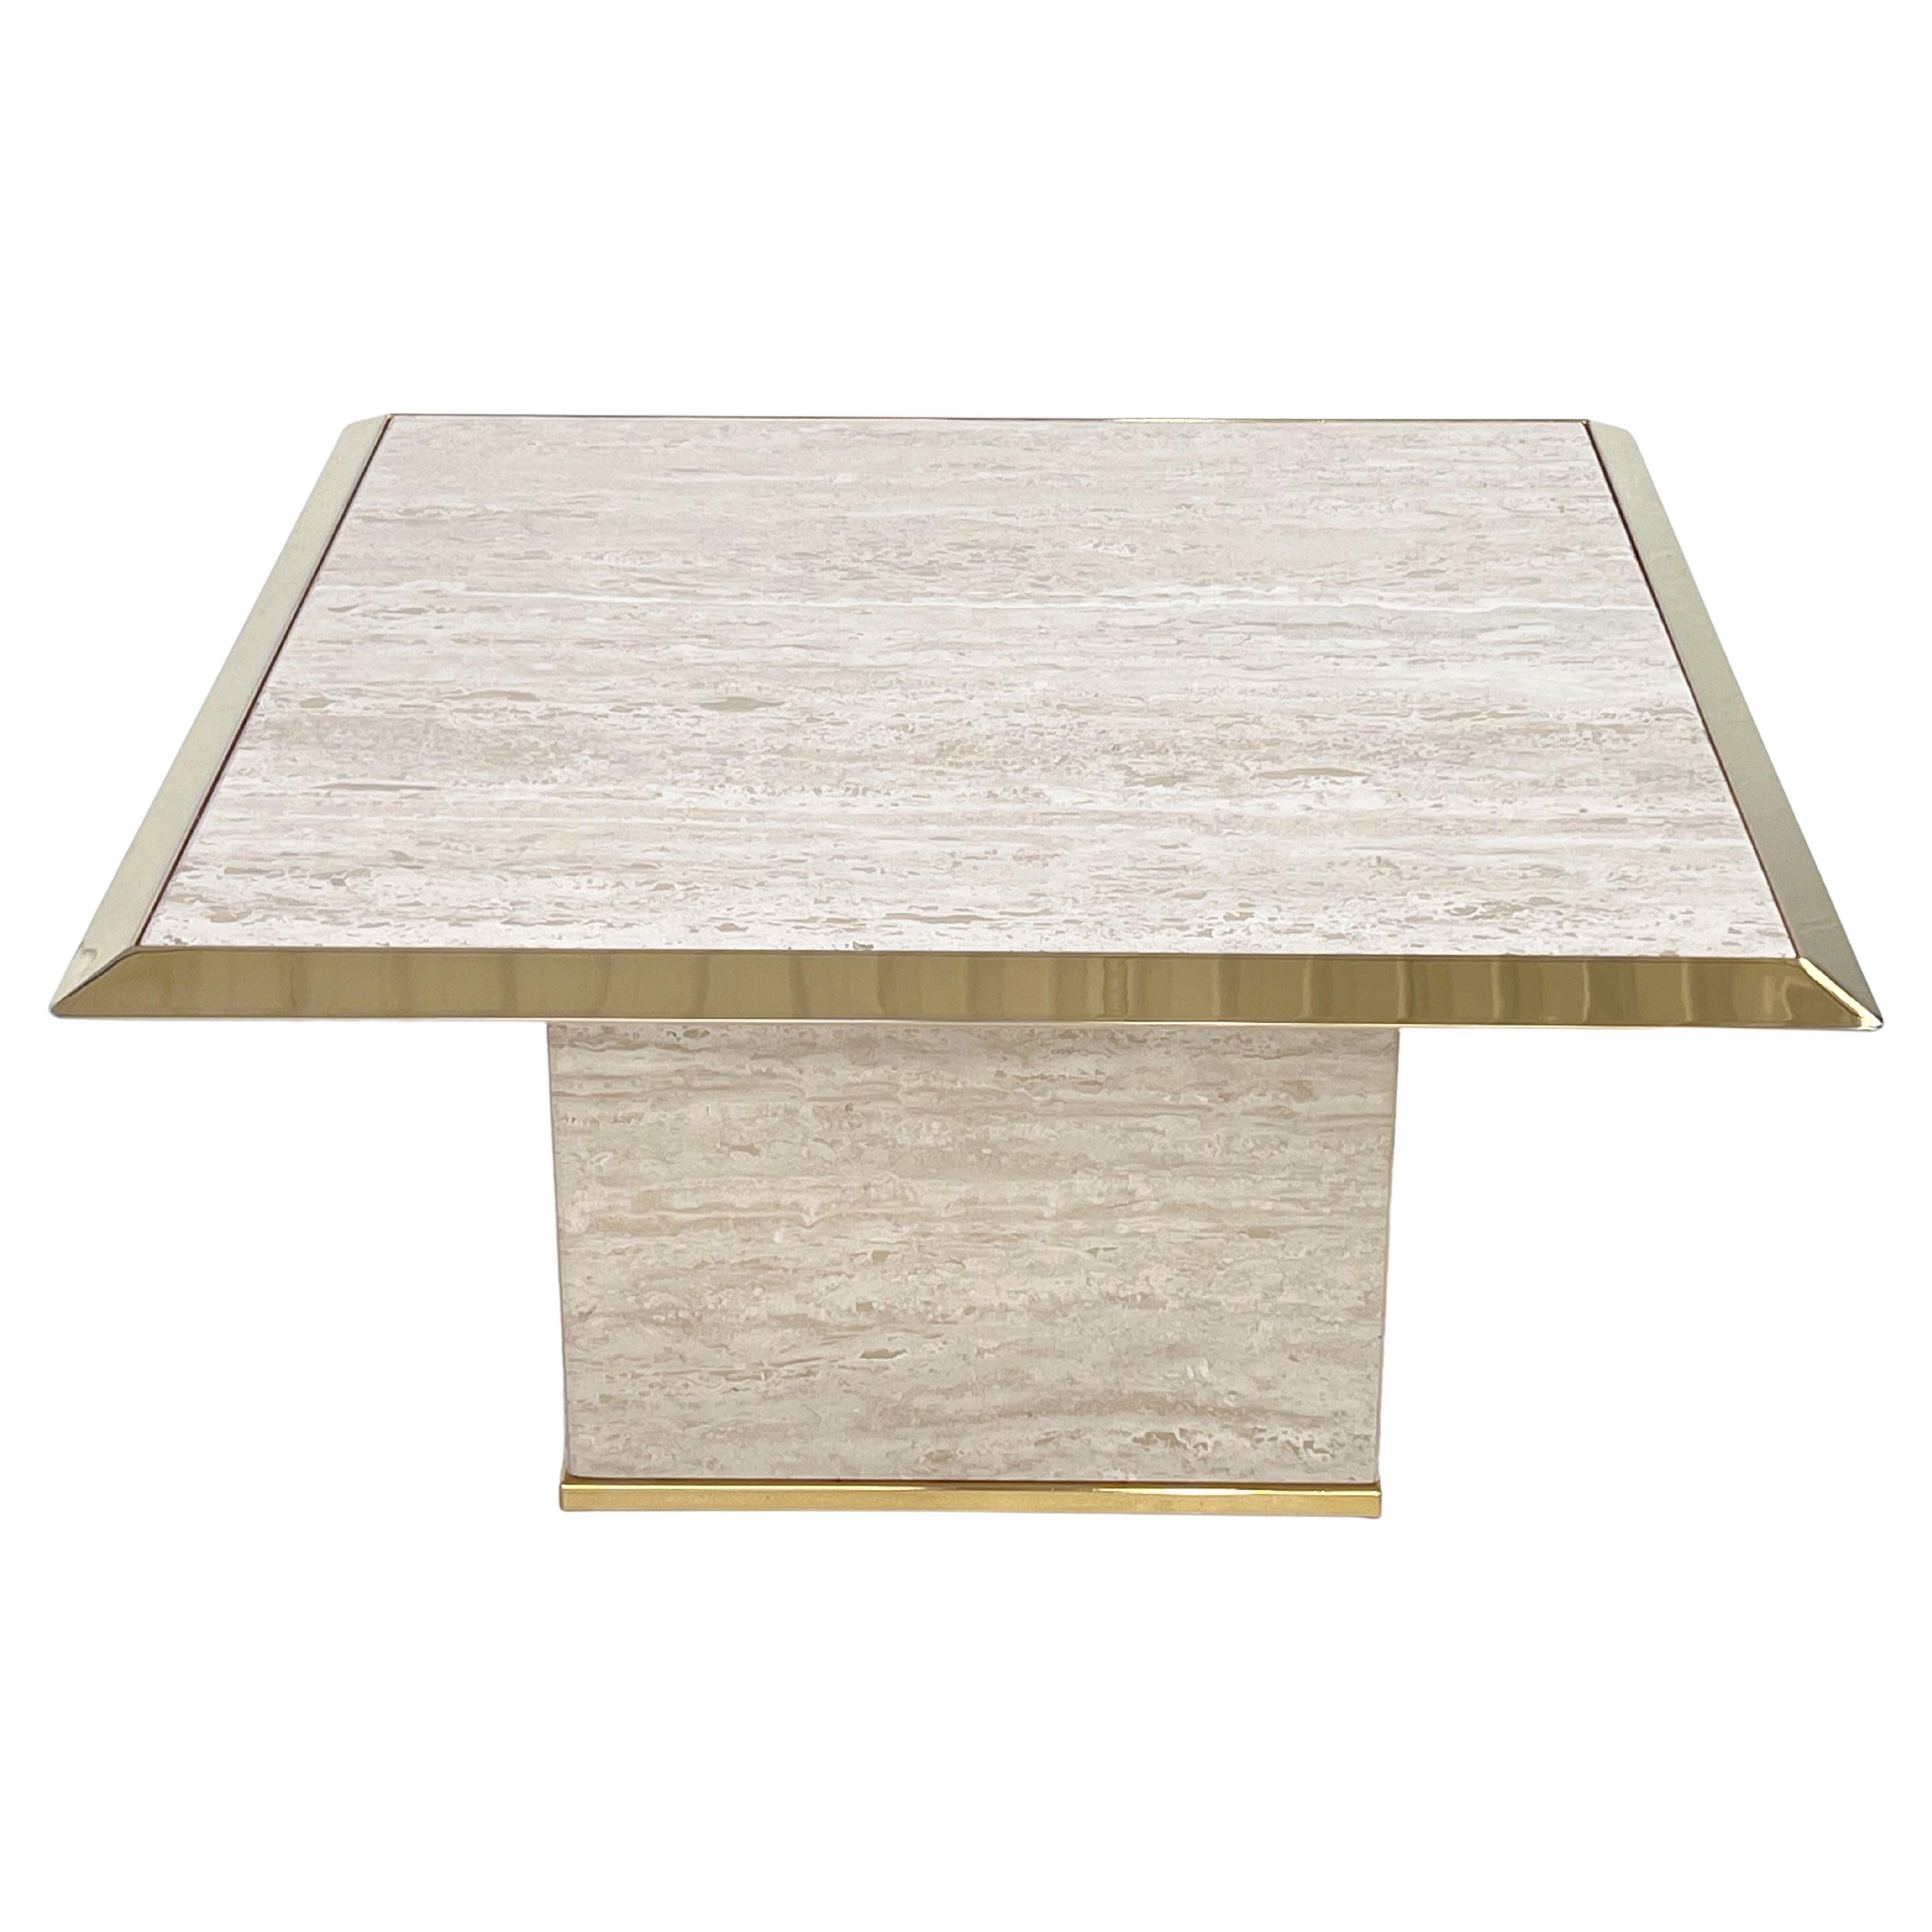 You will be seduced by the charm, the elegance and the presence of this 1970s Italian Design Hollywood Regency Style Travertine and Brass Coffee Table having an all structure in travertine underlined by a brass metal edging on top and base. All in